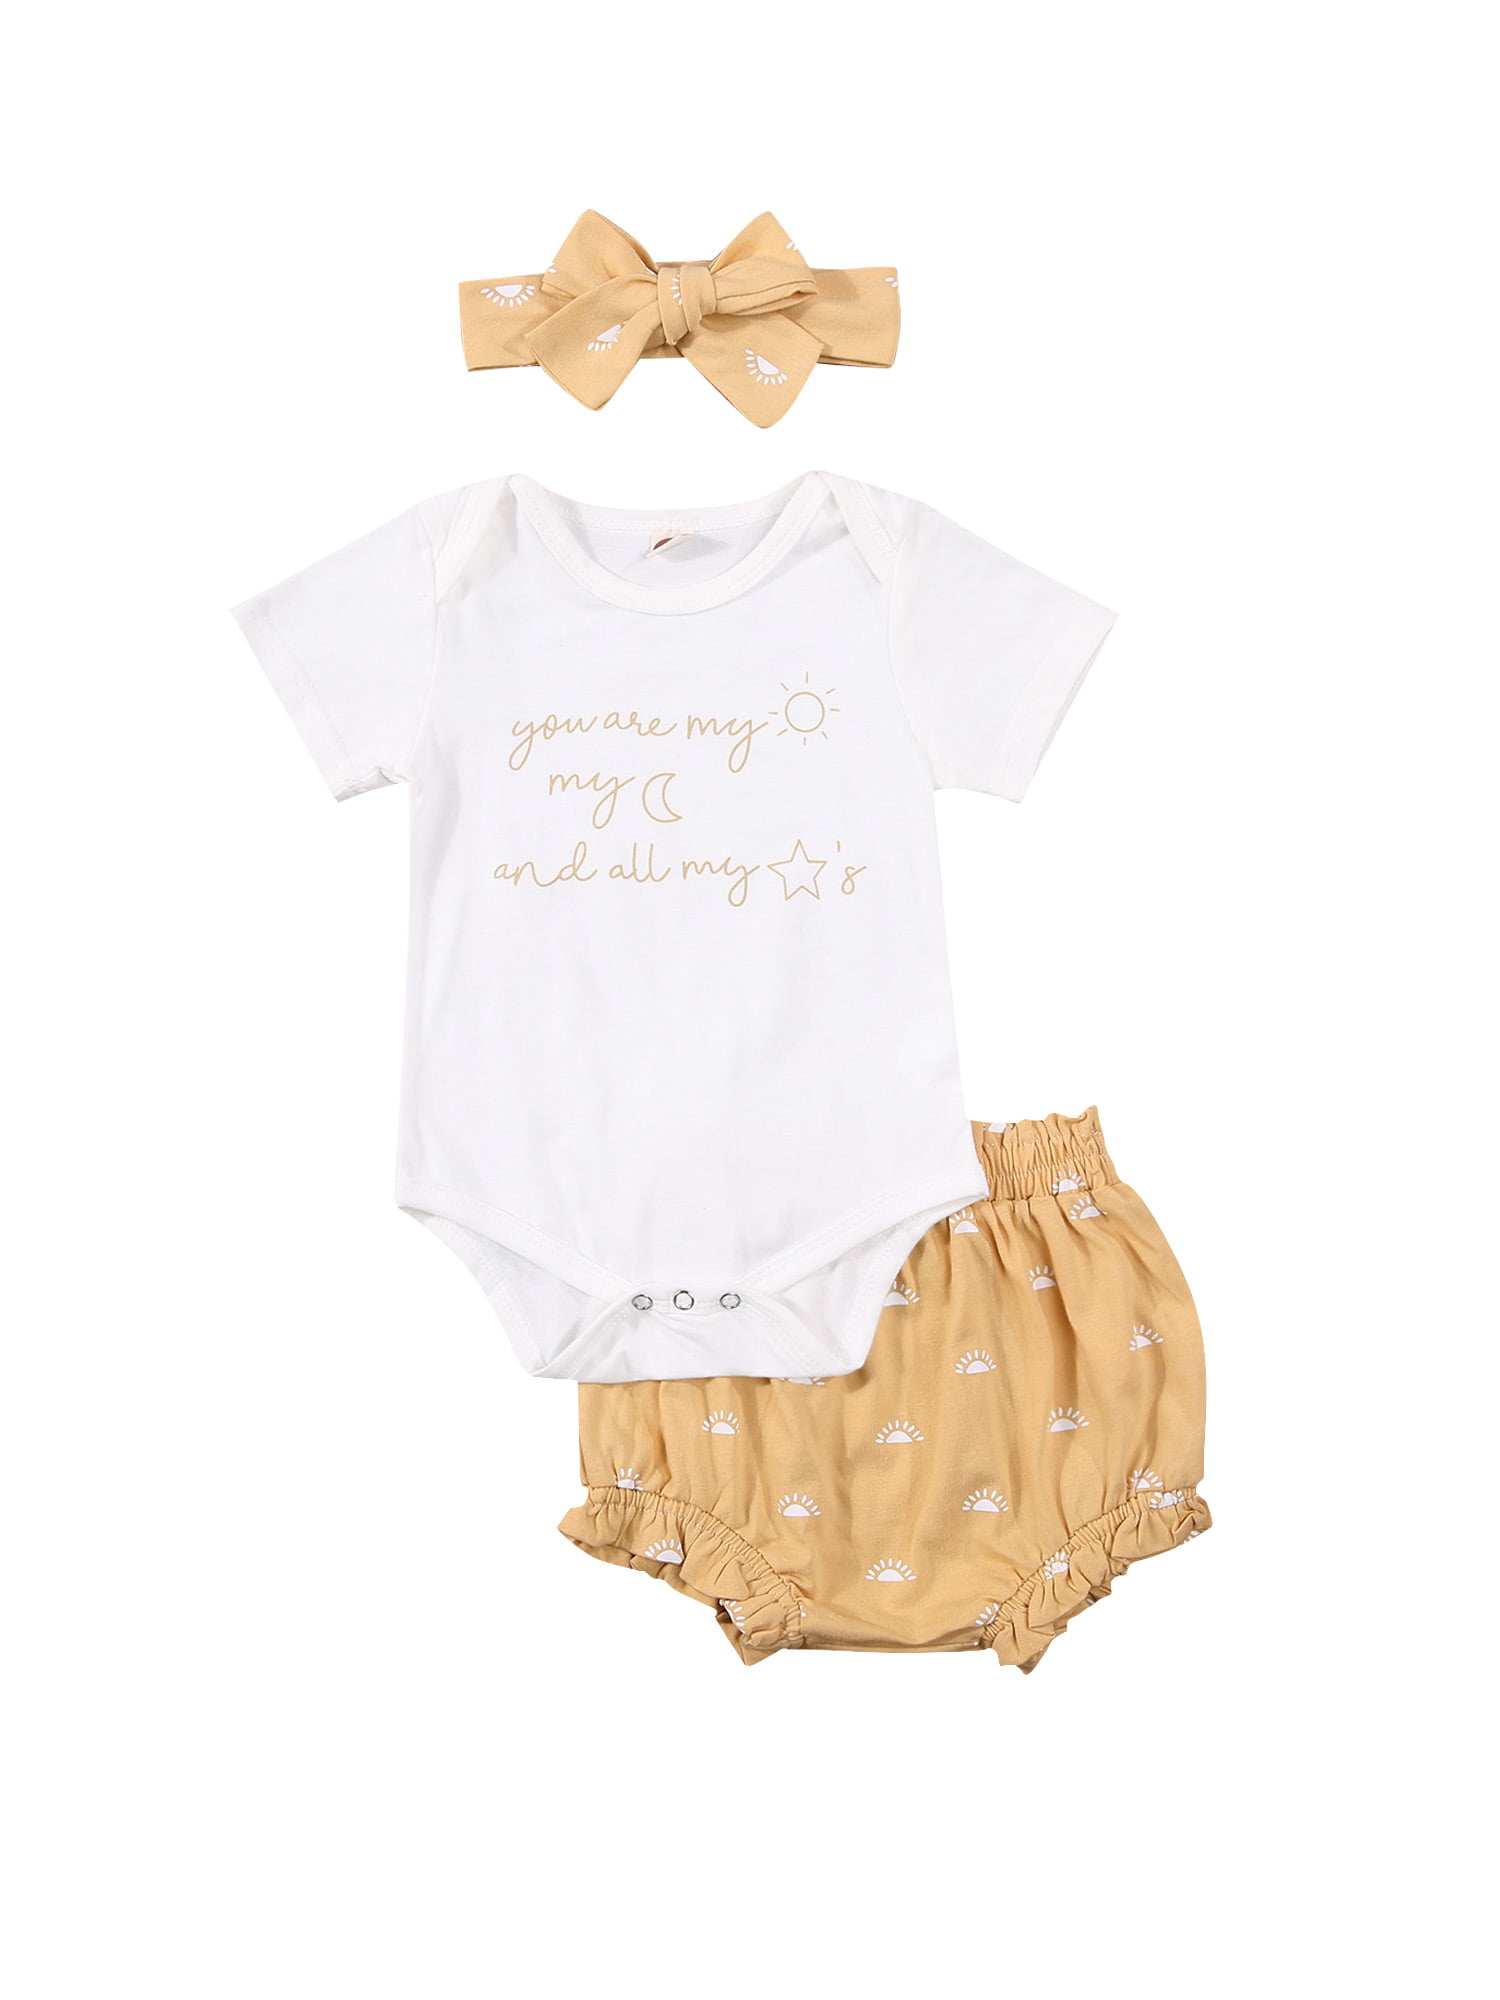 Newborn Baby Girl Summer Clothes Set Letter Printed Short Sleeve Bodysuit Romper Top Headband 3Pcs Outfits Shorts 